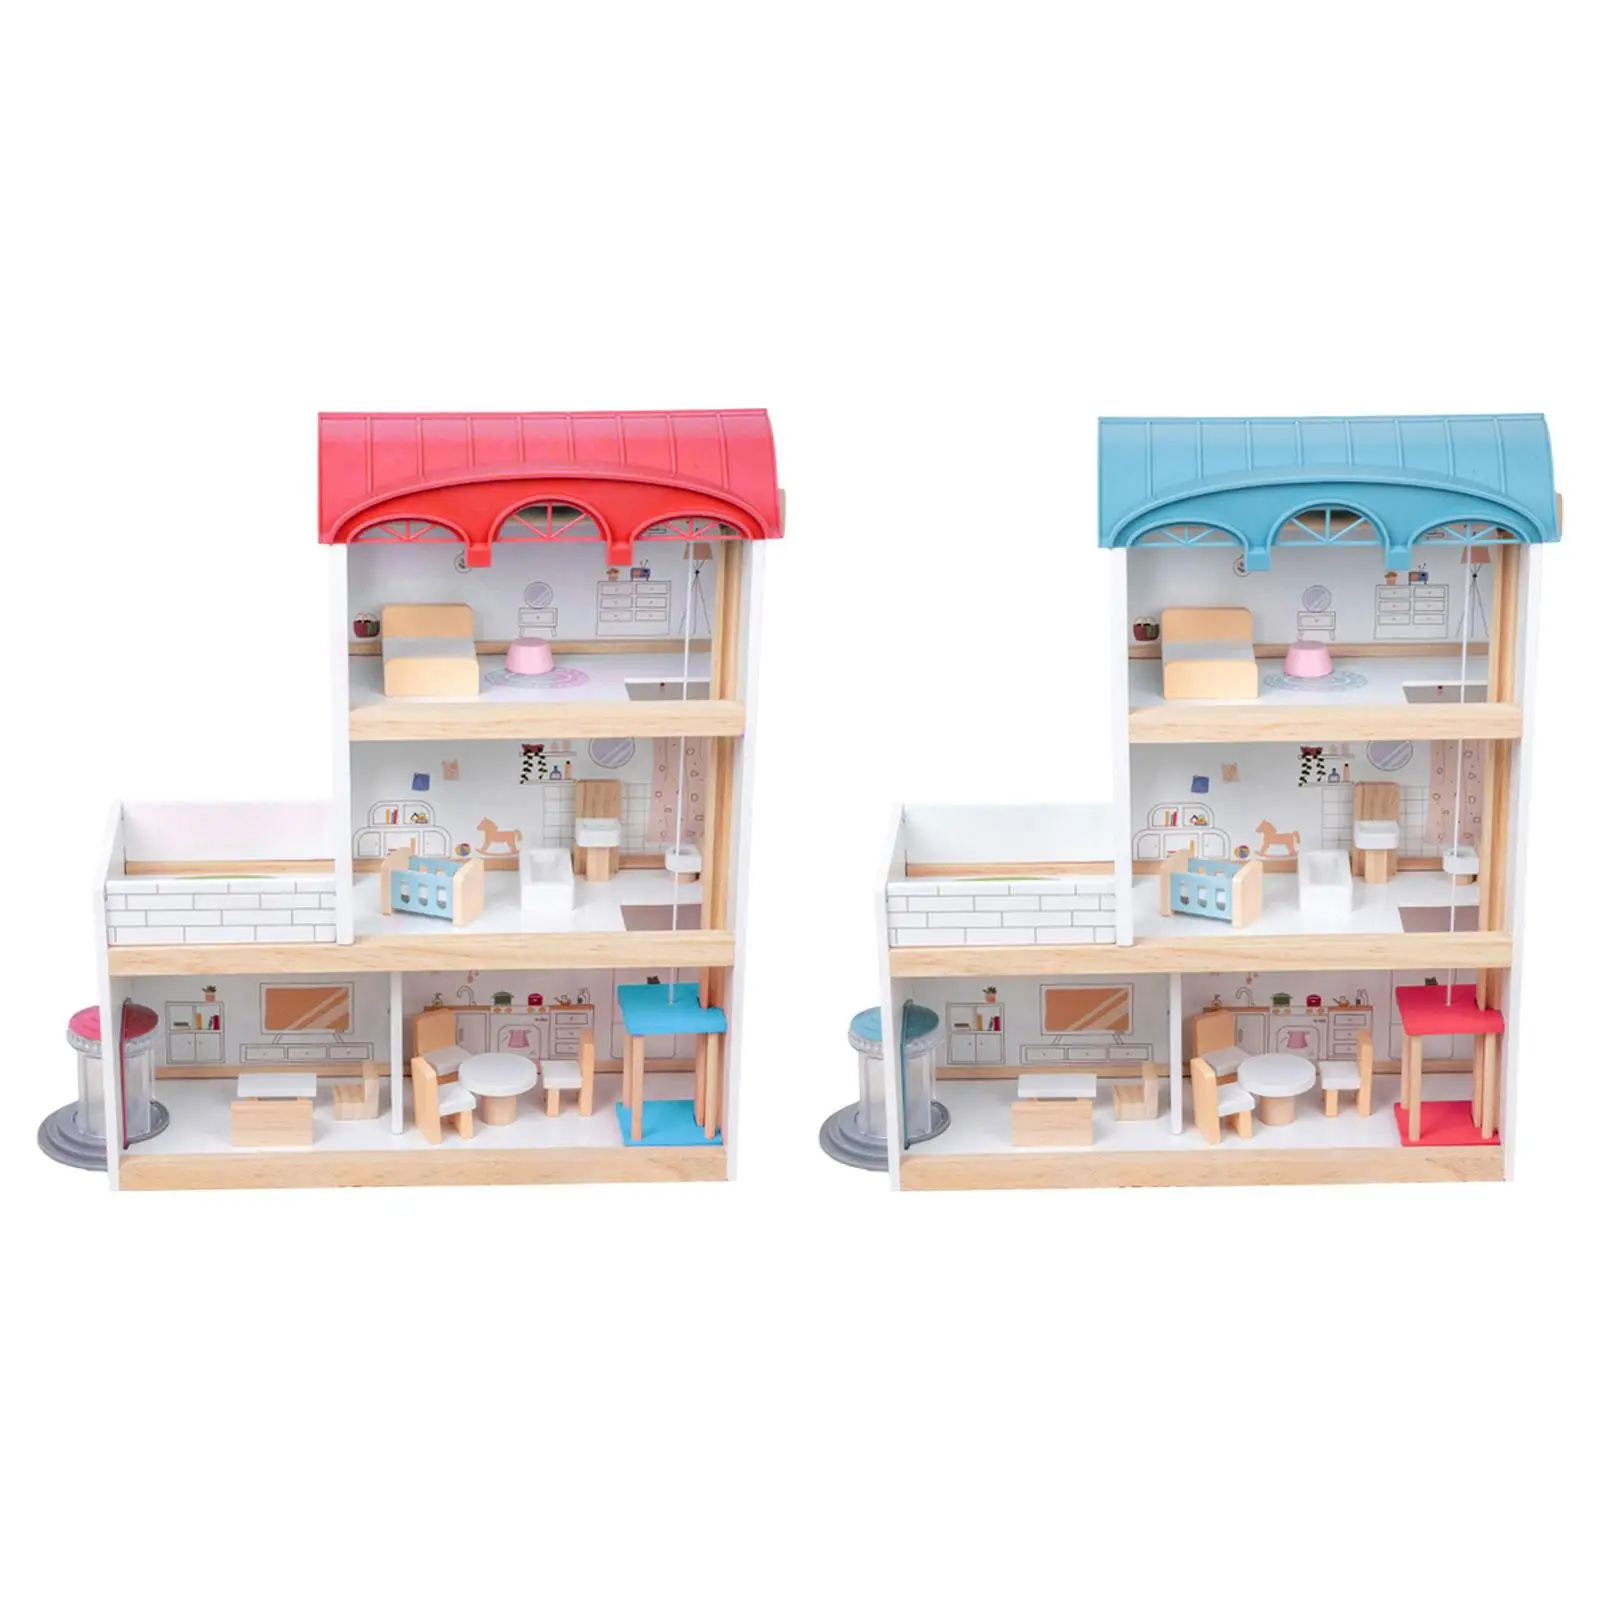 Wooden Dollhouse Mini Furniture Toy for Kids Gift Toy Garden Indoor Outdoor 3 Years and up Easy to Assemble European Style House